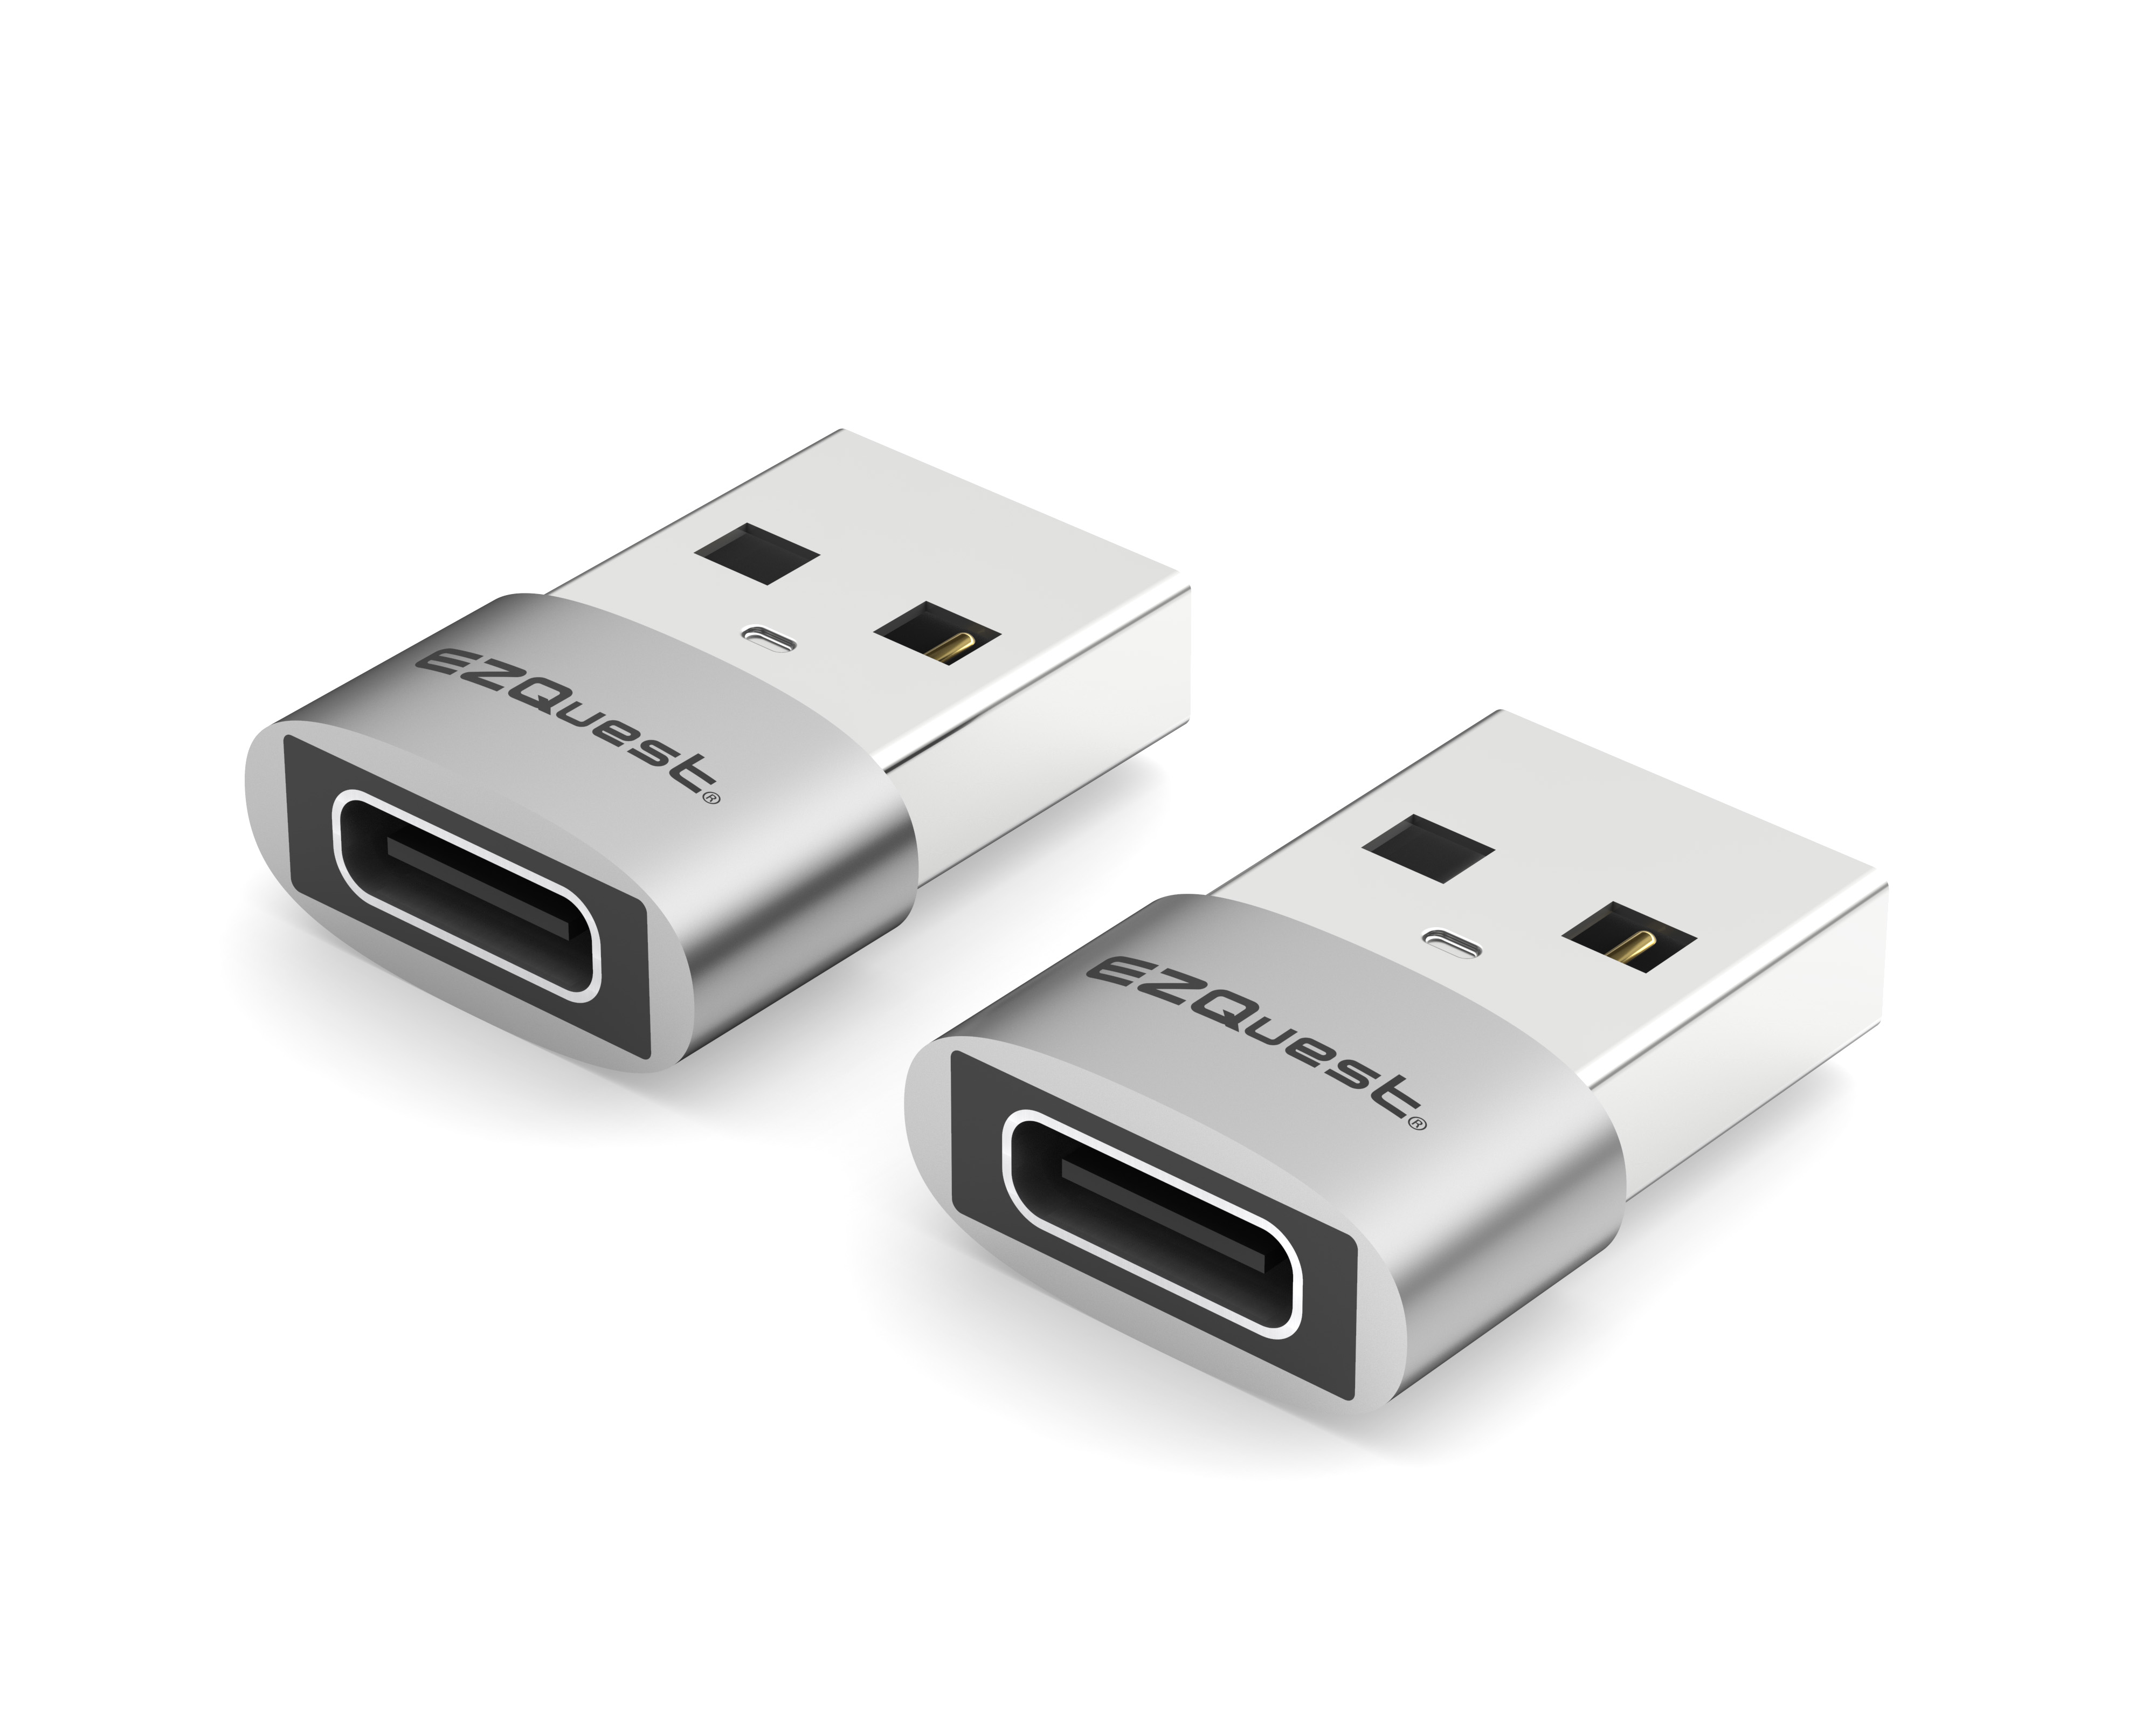 Forvirre Email Latter USB-C Female to USB-A Male Mini Adapter 2 Pack